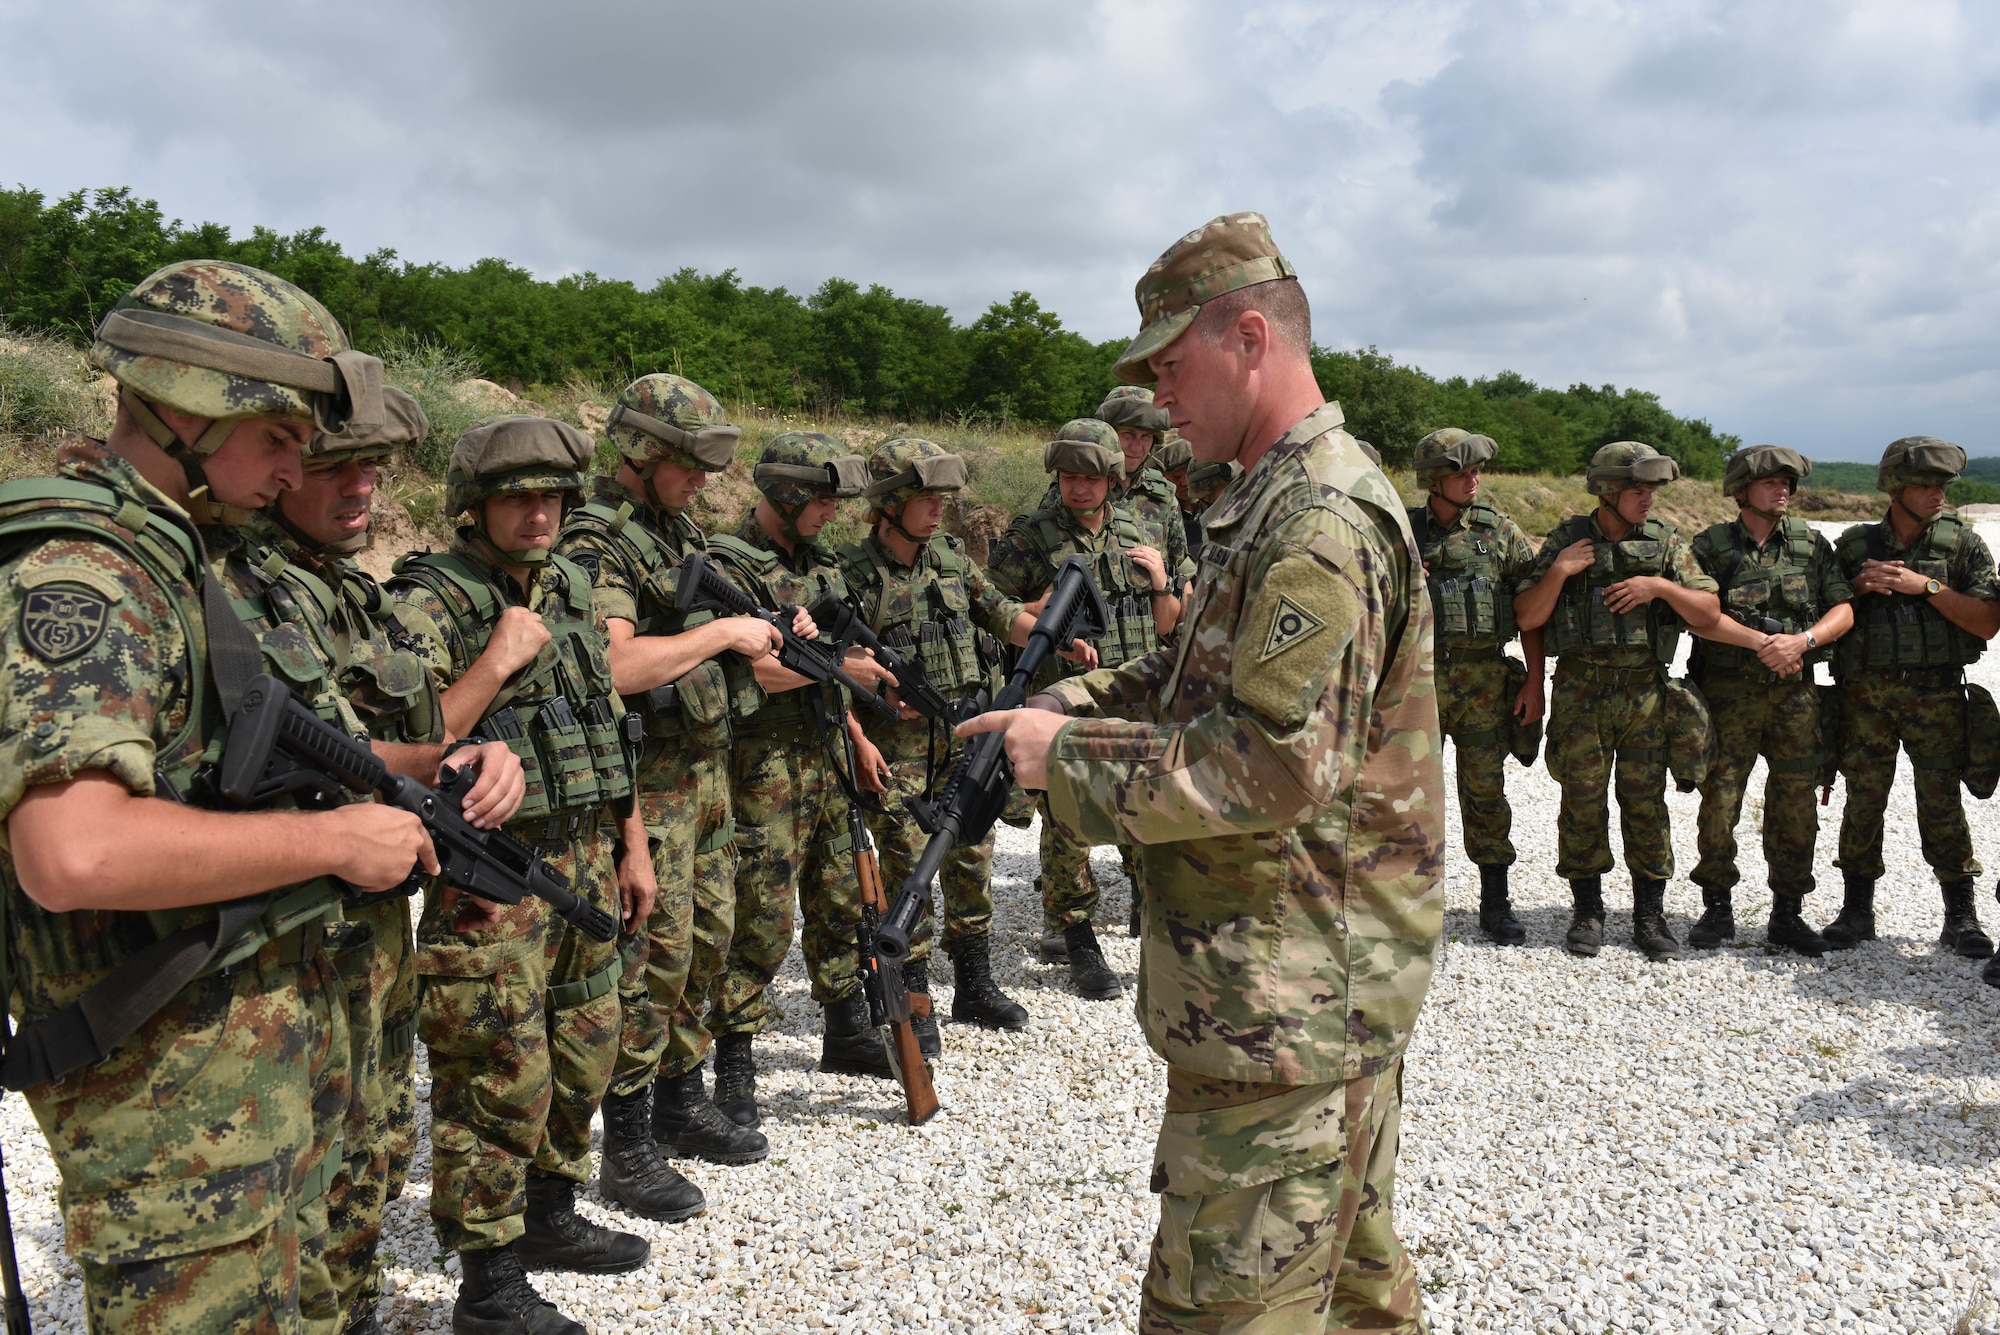 Sgt. Joshua Stiles, assigned to the Ohio National Guard’s Military Police Company, instructs members of the Serbian Armed Forces on non-lethal weapons tactics during Exercise Platinum Wolf 2018, June 15, 2018.